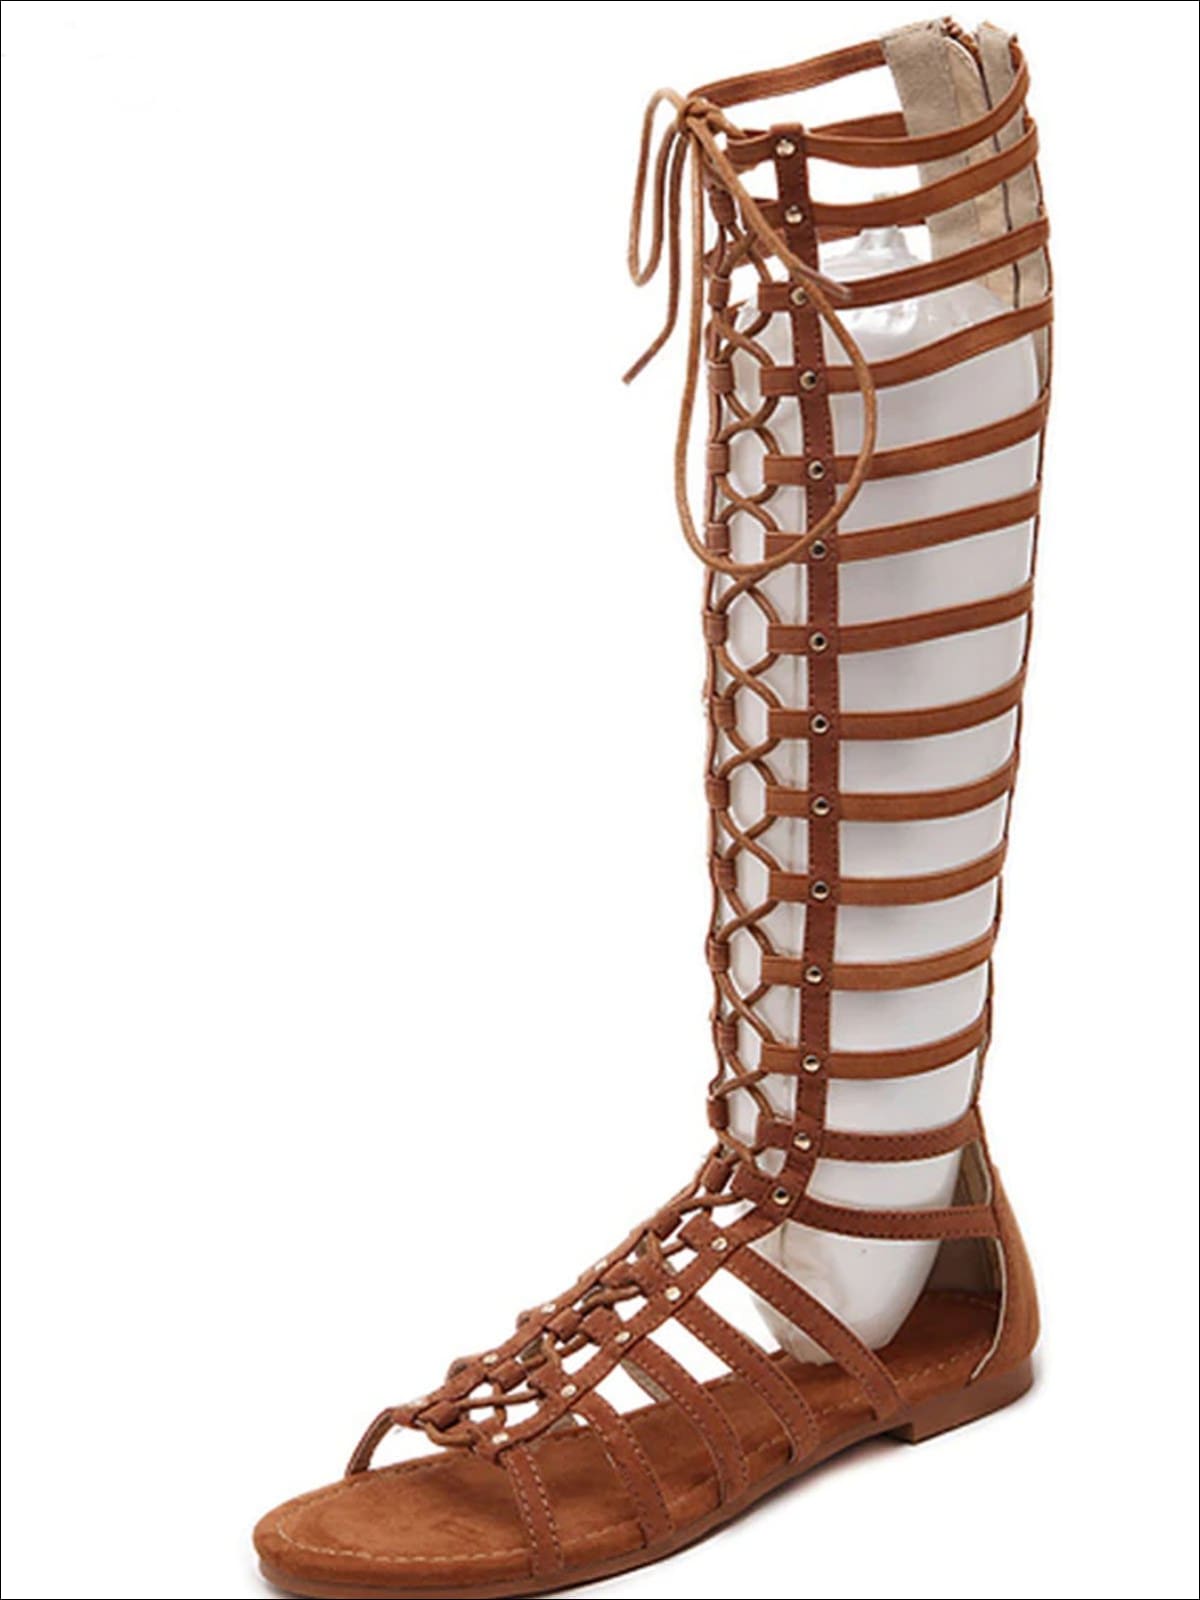 Women's Knee High Lace Up Gladiator Sandals - Mia Belle Girls